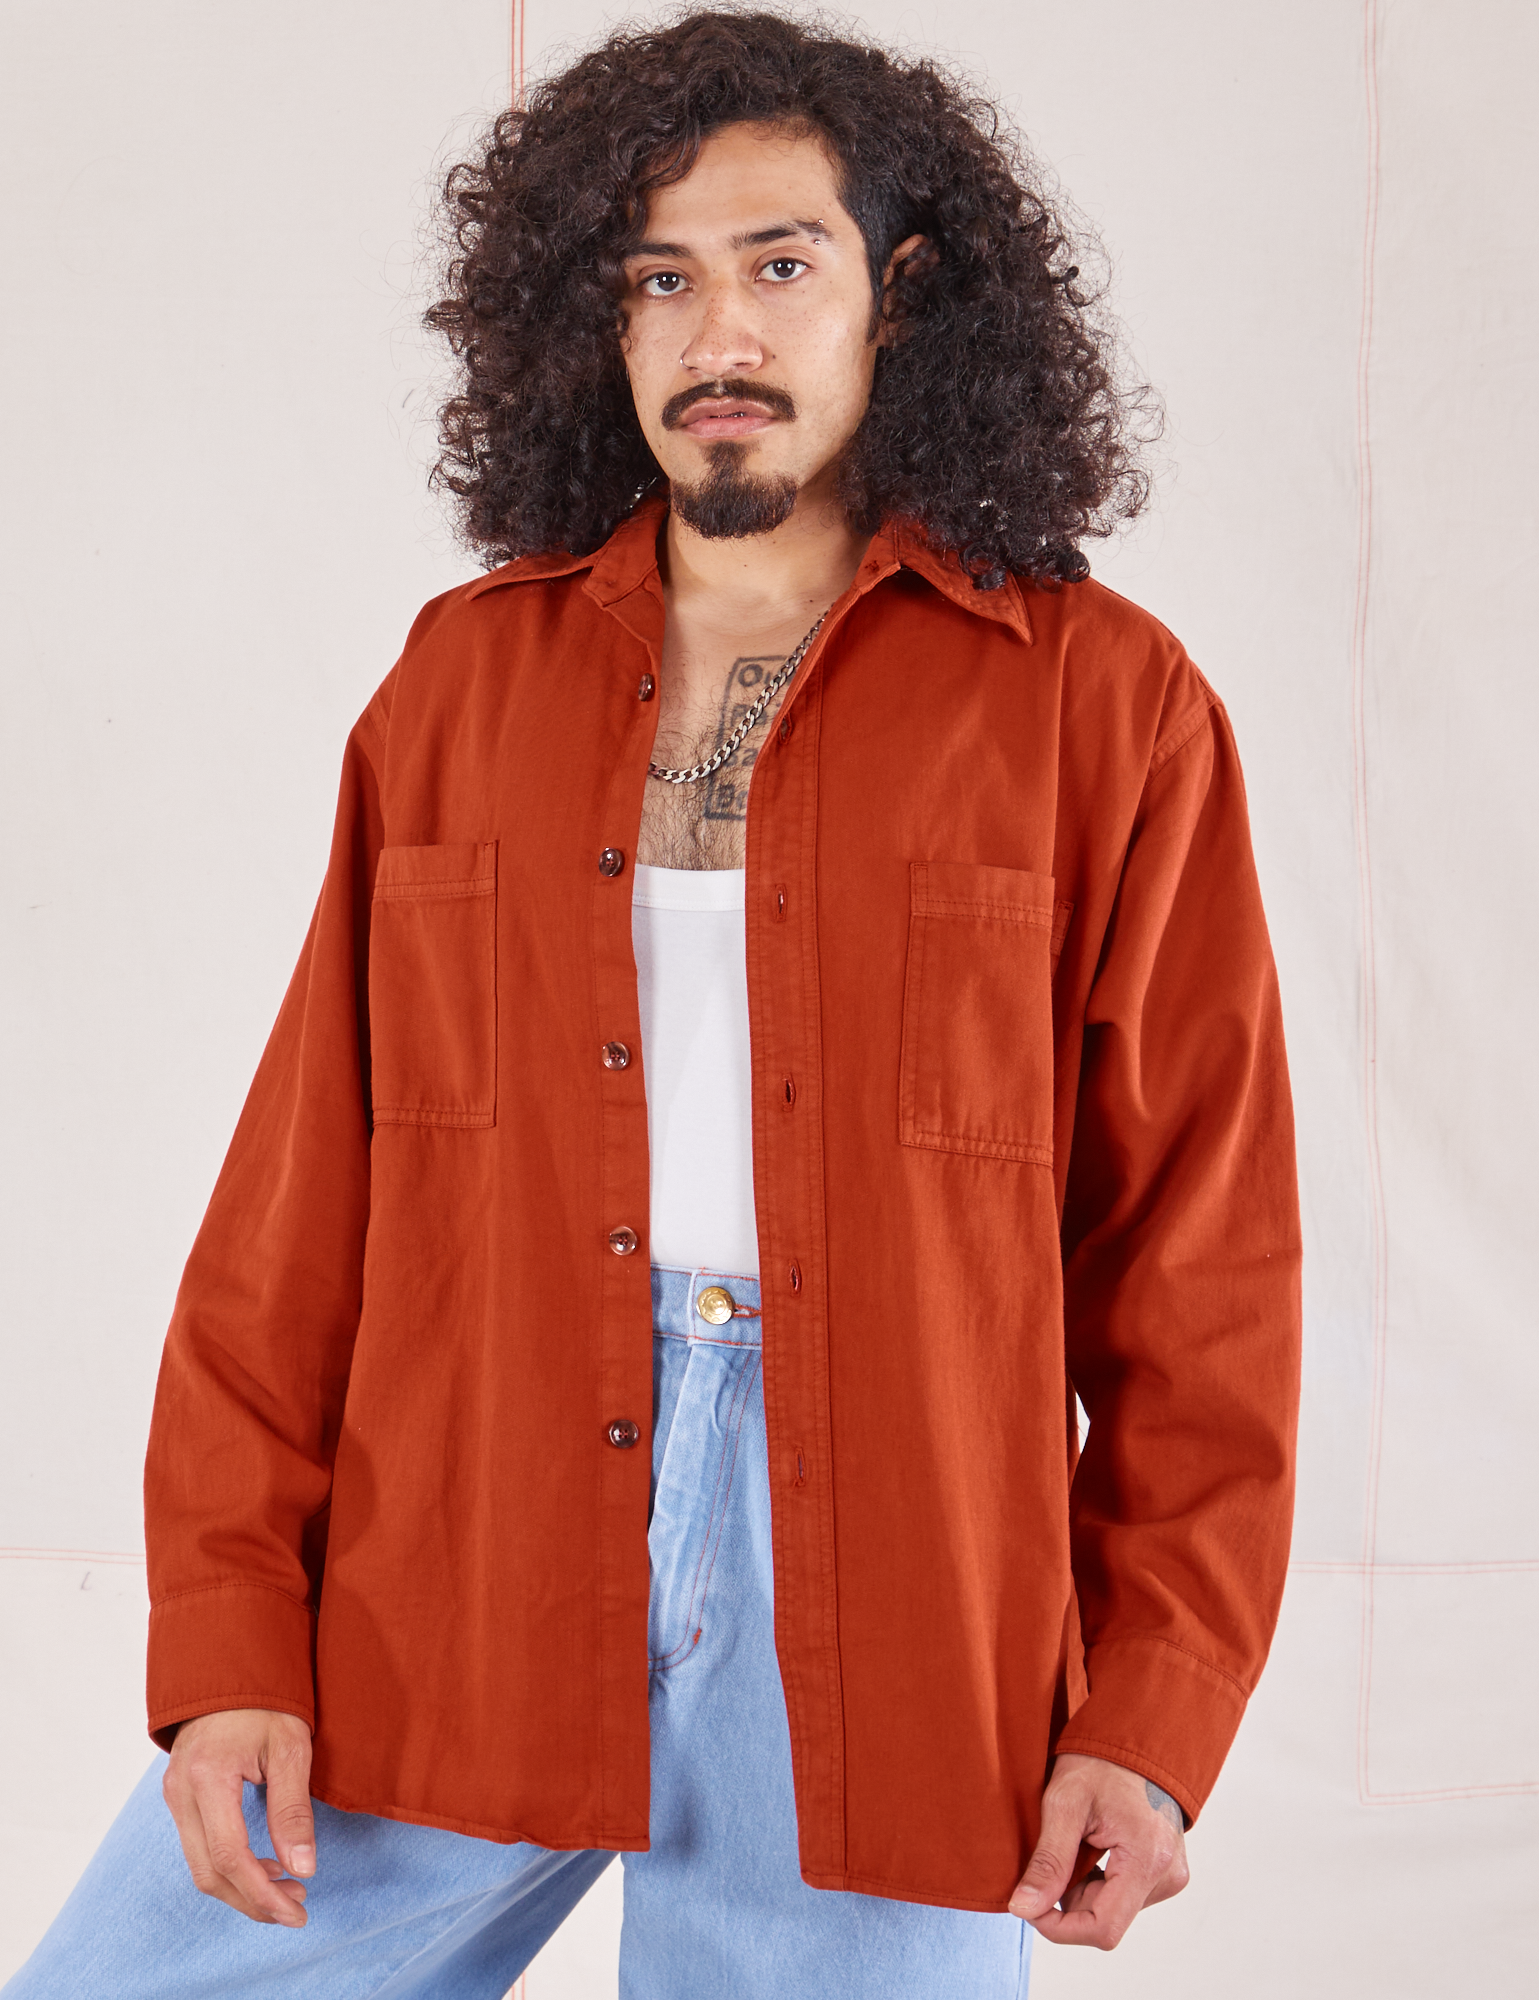 Jesse is 5&#39;8&quot; and wearing S Oversize Overshirt in Paprika